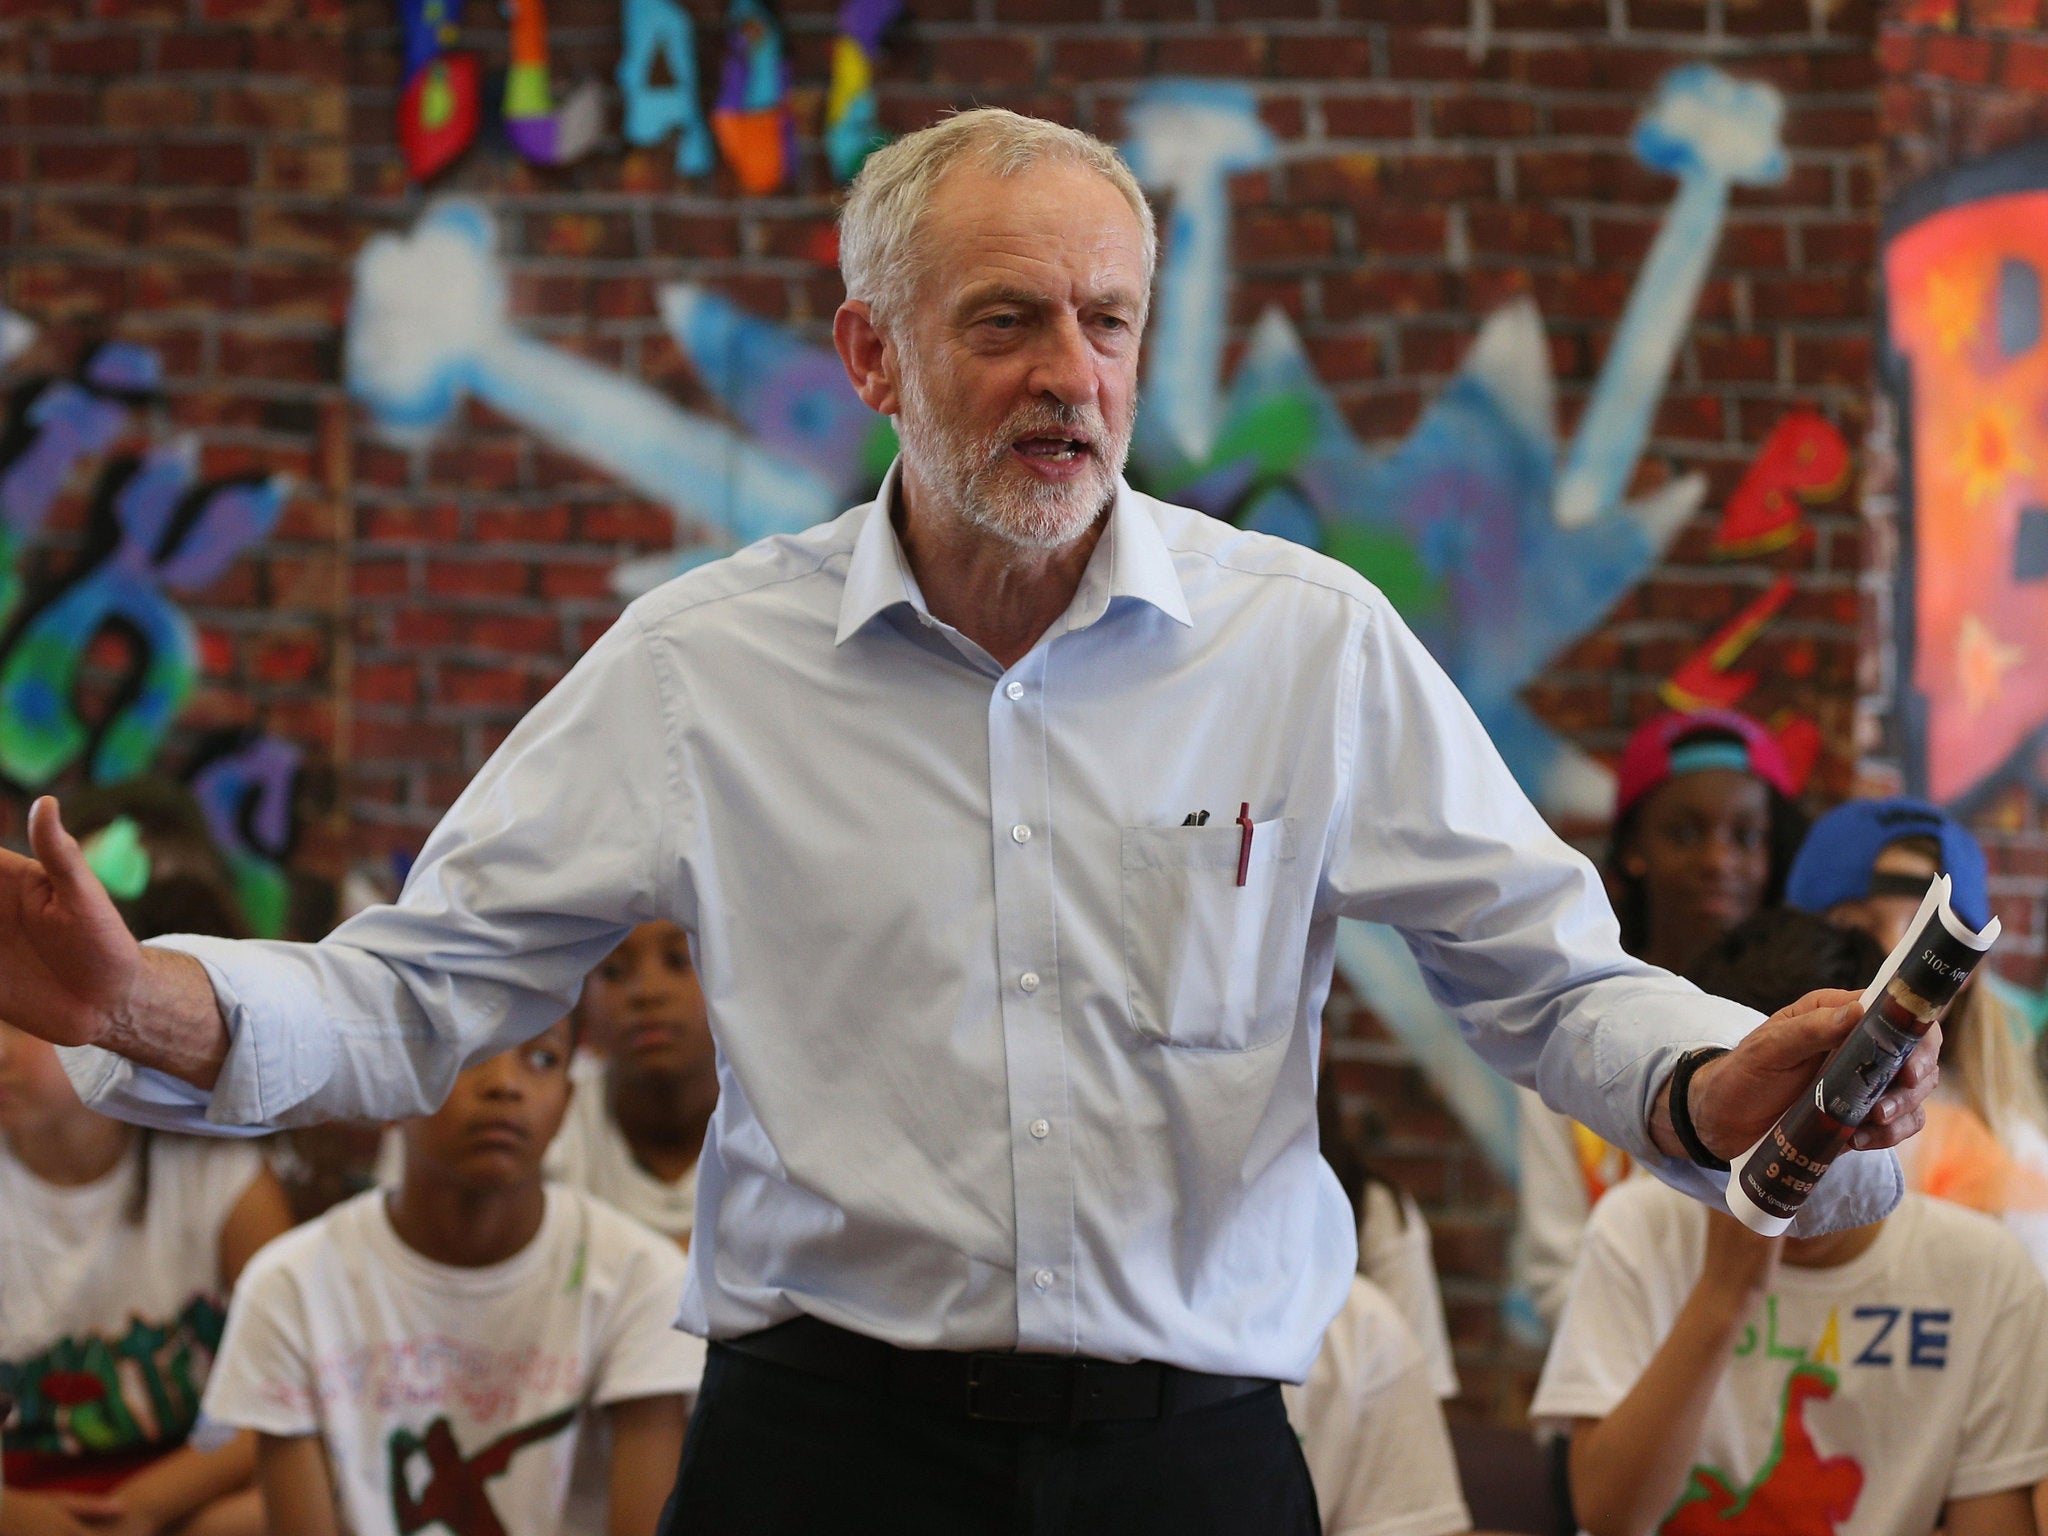 Jeremy Corbyn presents pupils with certificates after they perform in a play on their last day of school at Duncombe Primary School in London